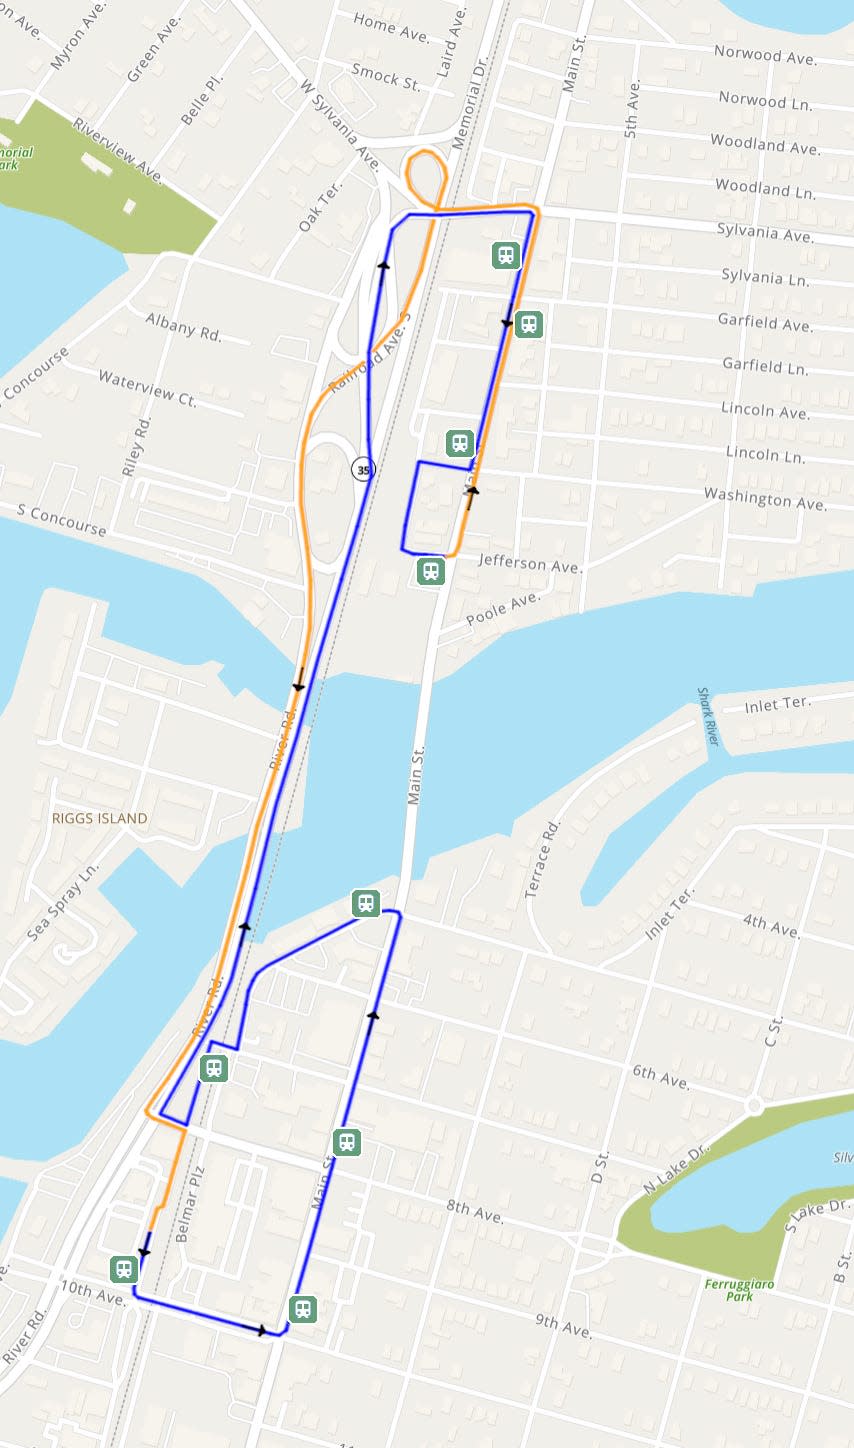 The Route 71 Shark River shuttle bus route.